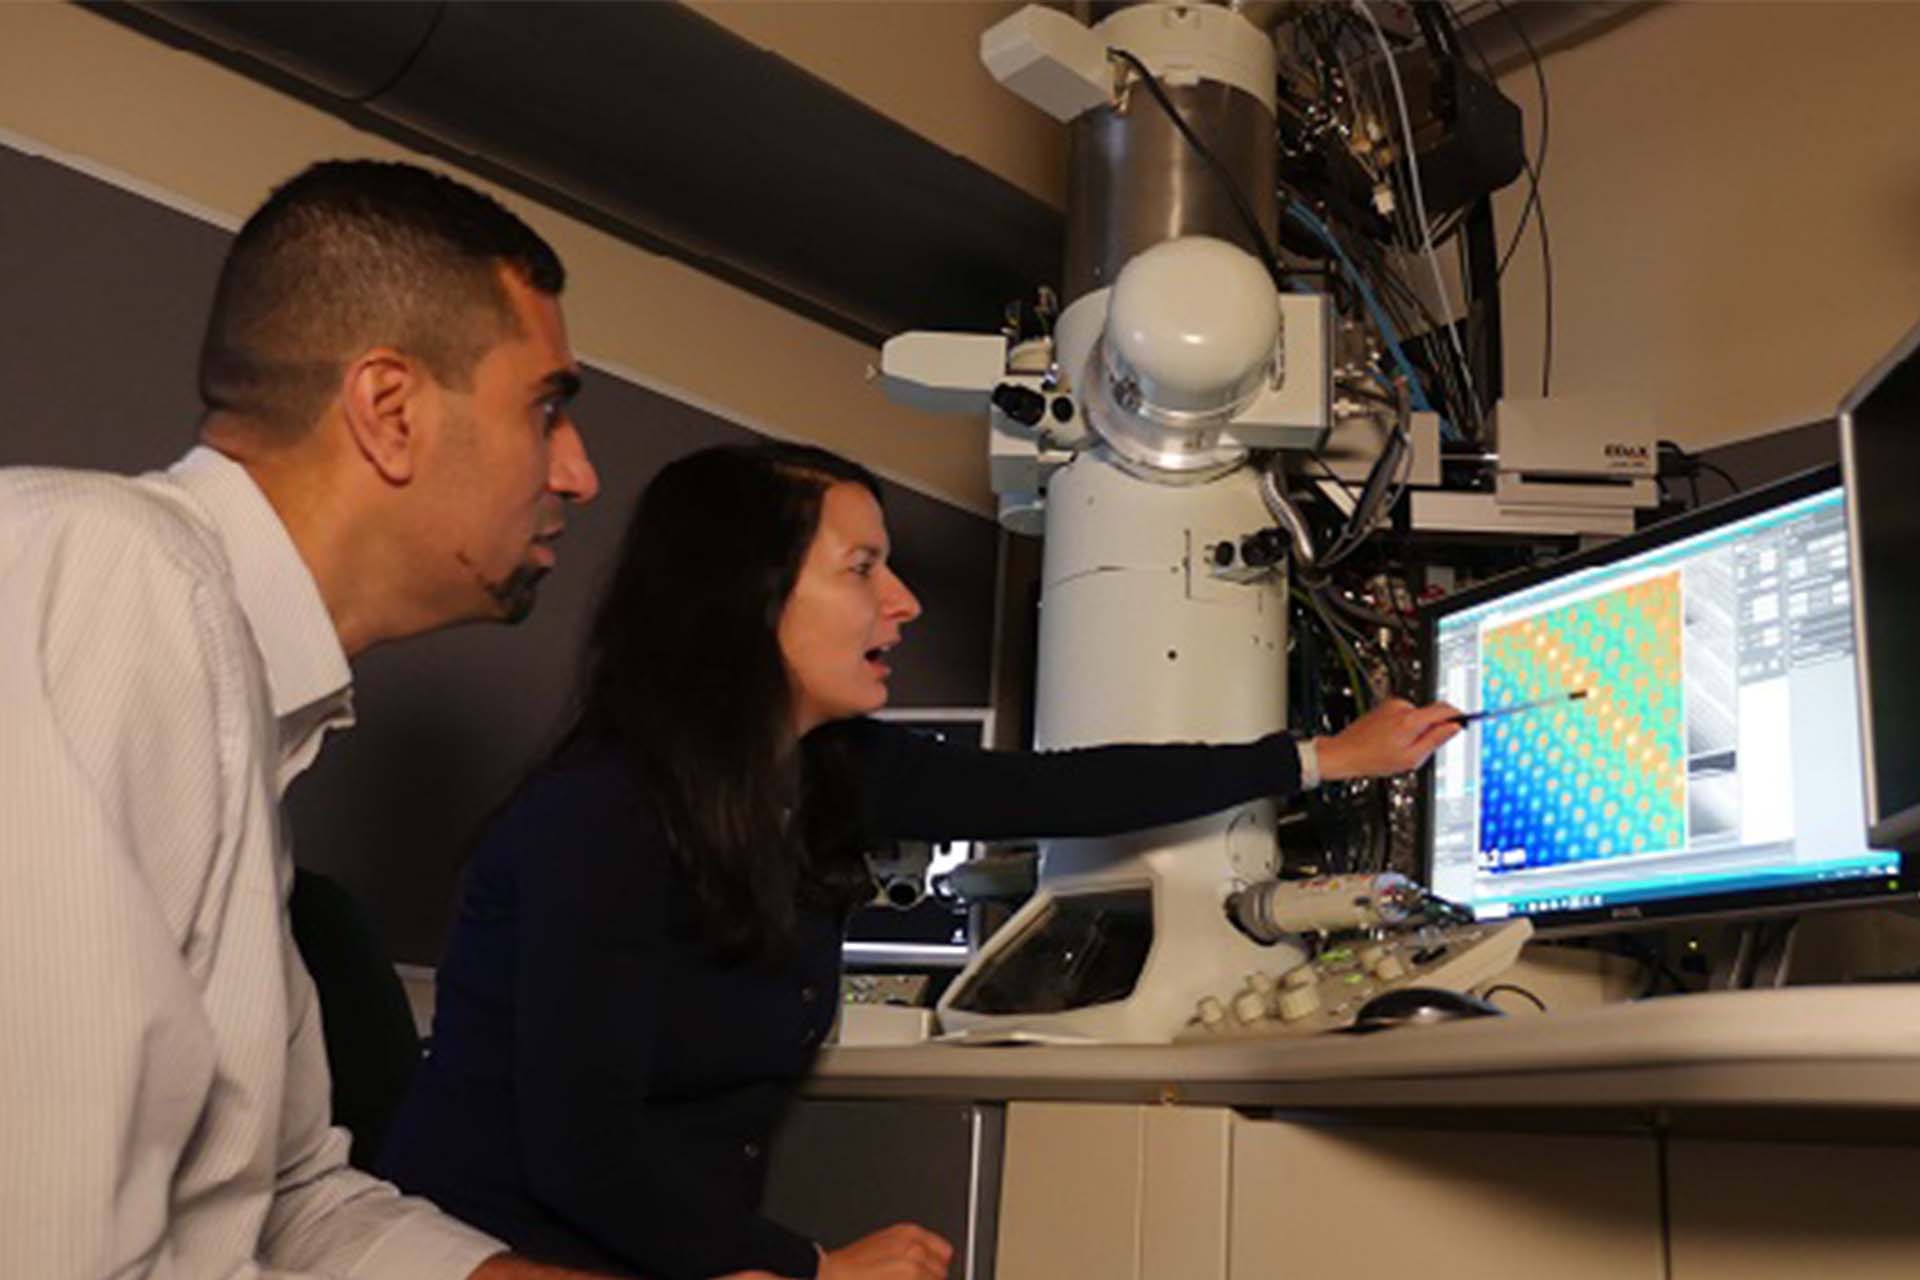 Researchers looking at the screen output of an ultra-high-resolution microscope